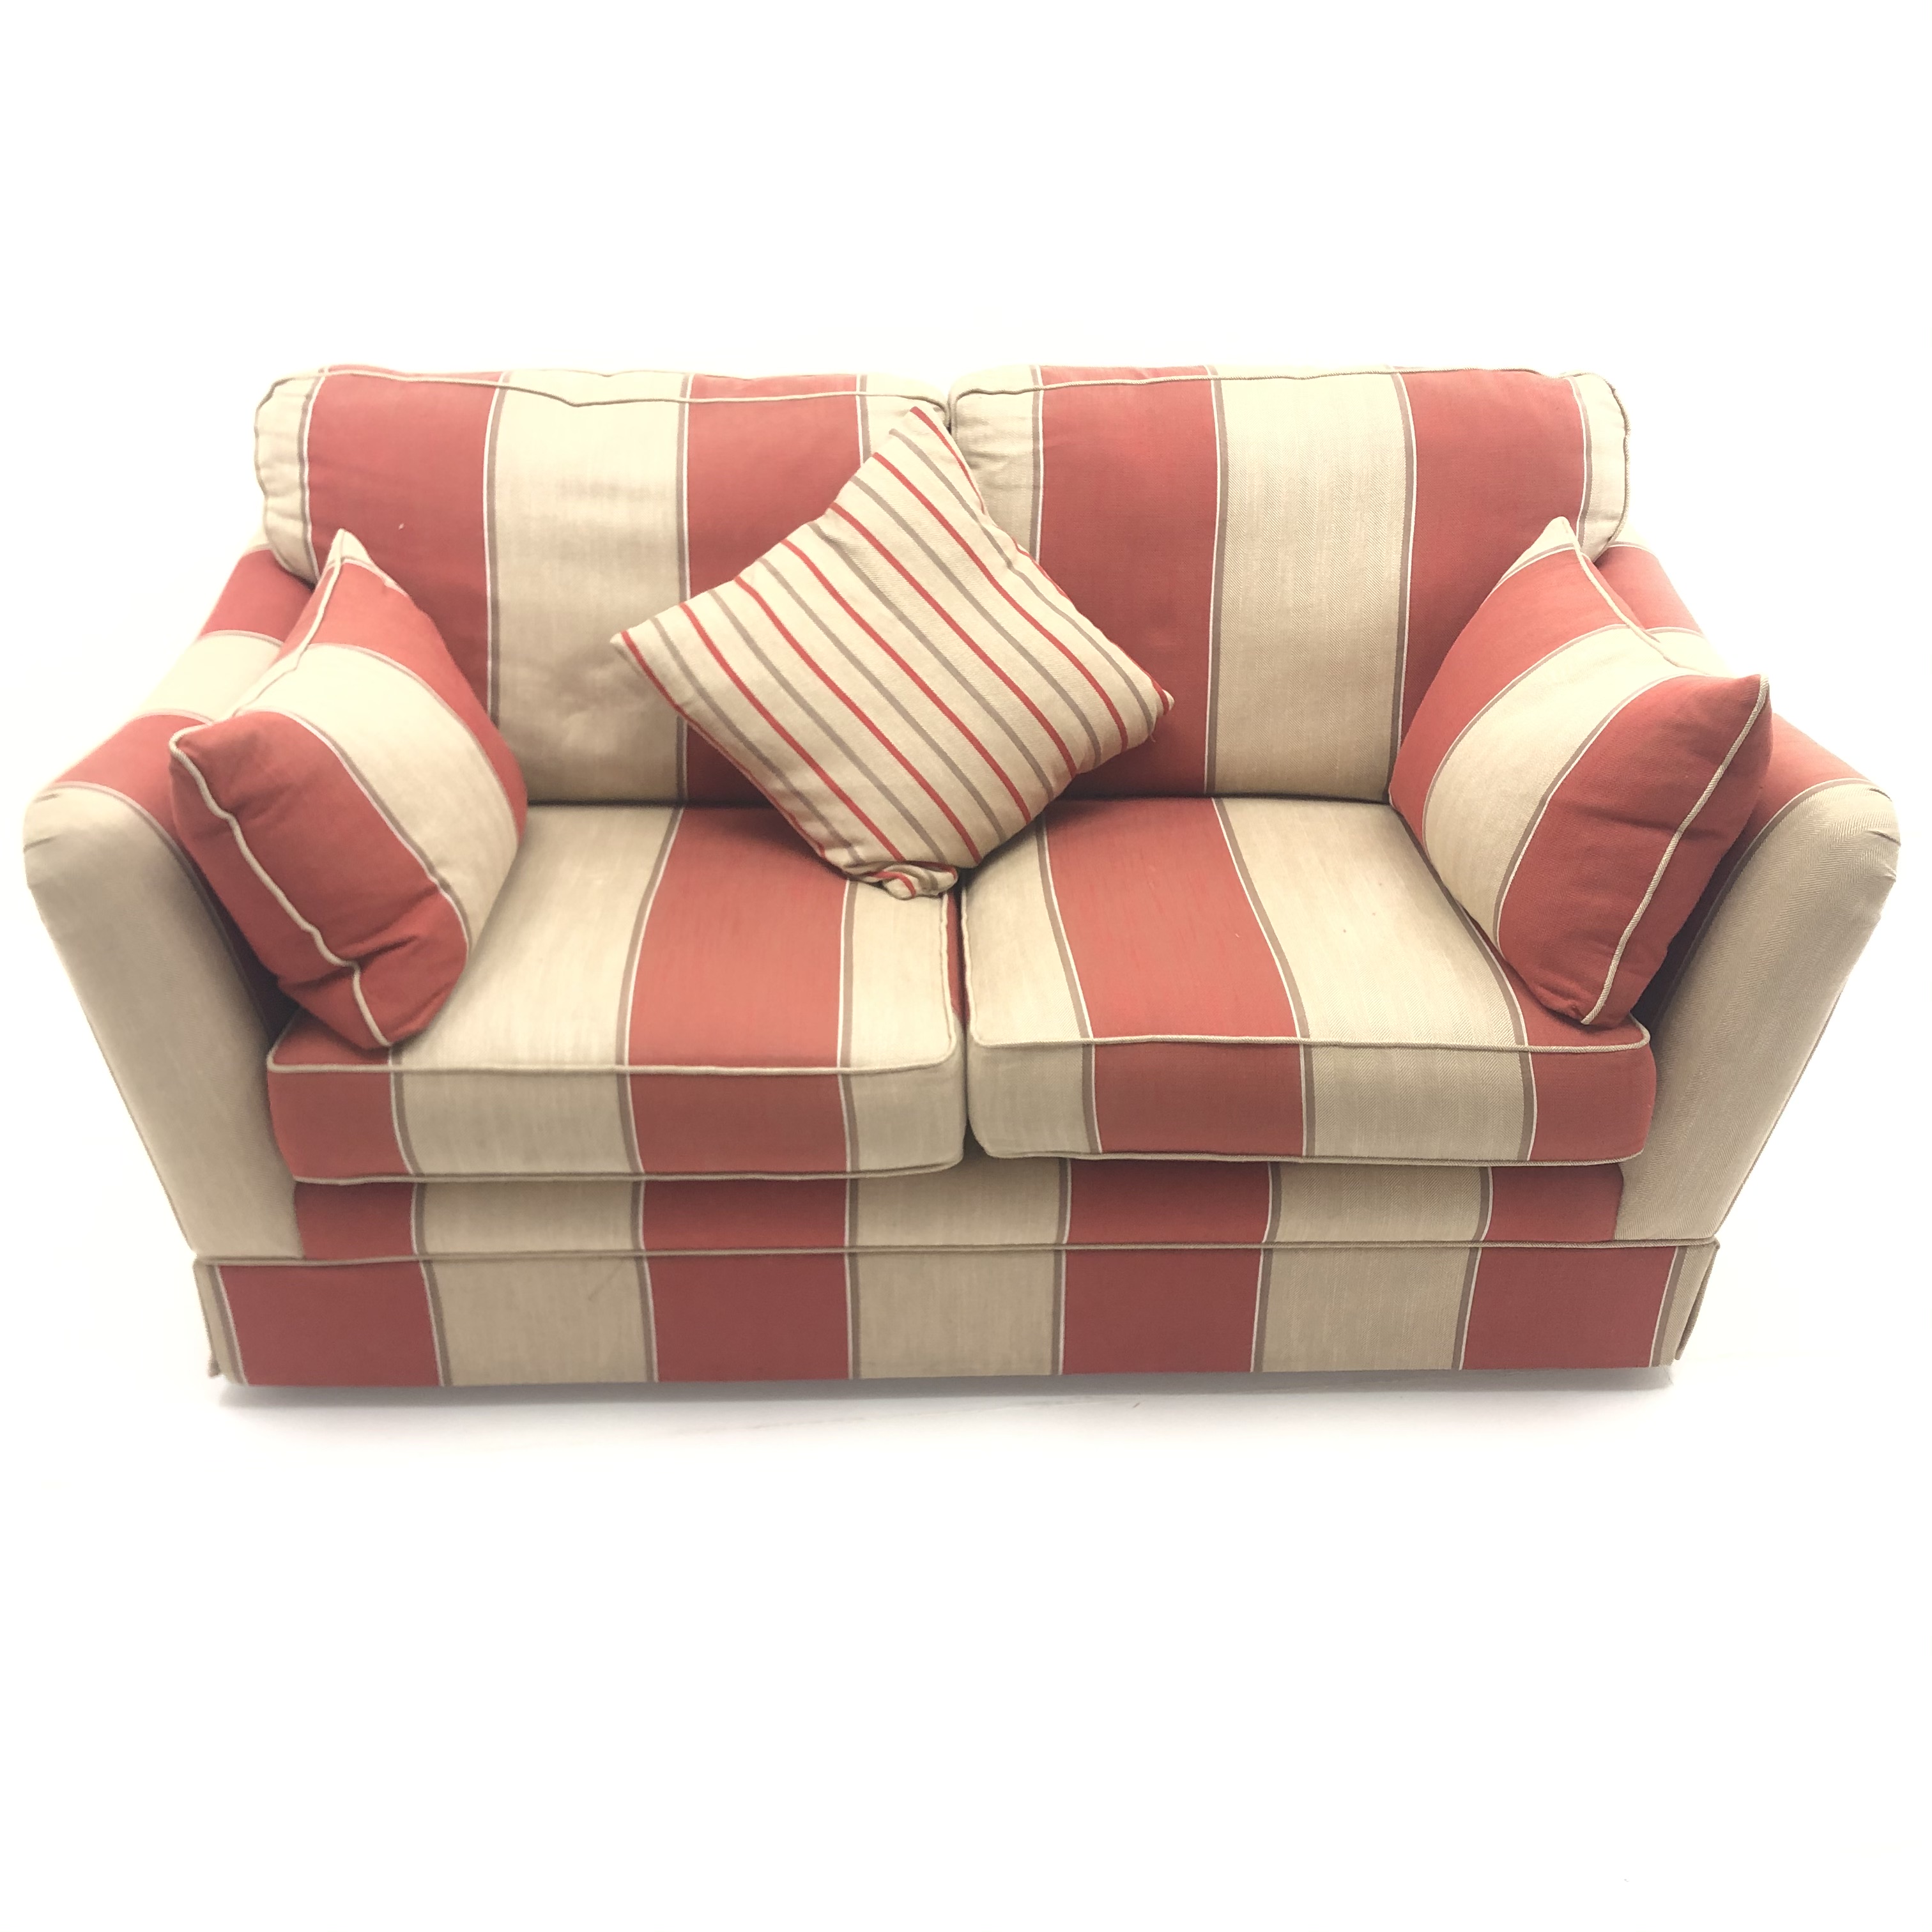 Alstons two seat sofa, upholstered in deep terracotta stripe fabric, - Image 2 of 3